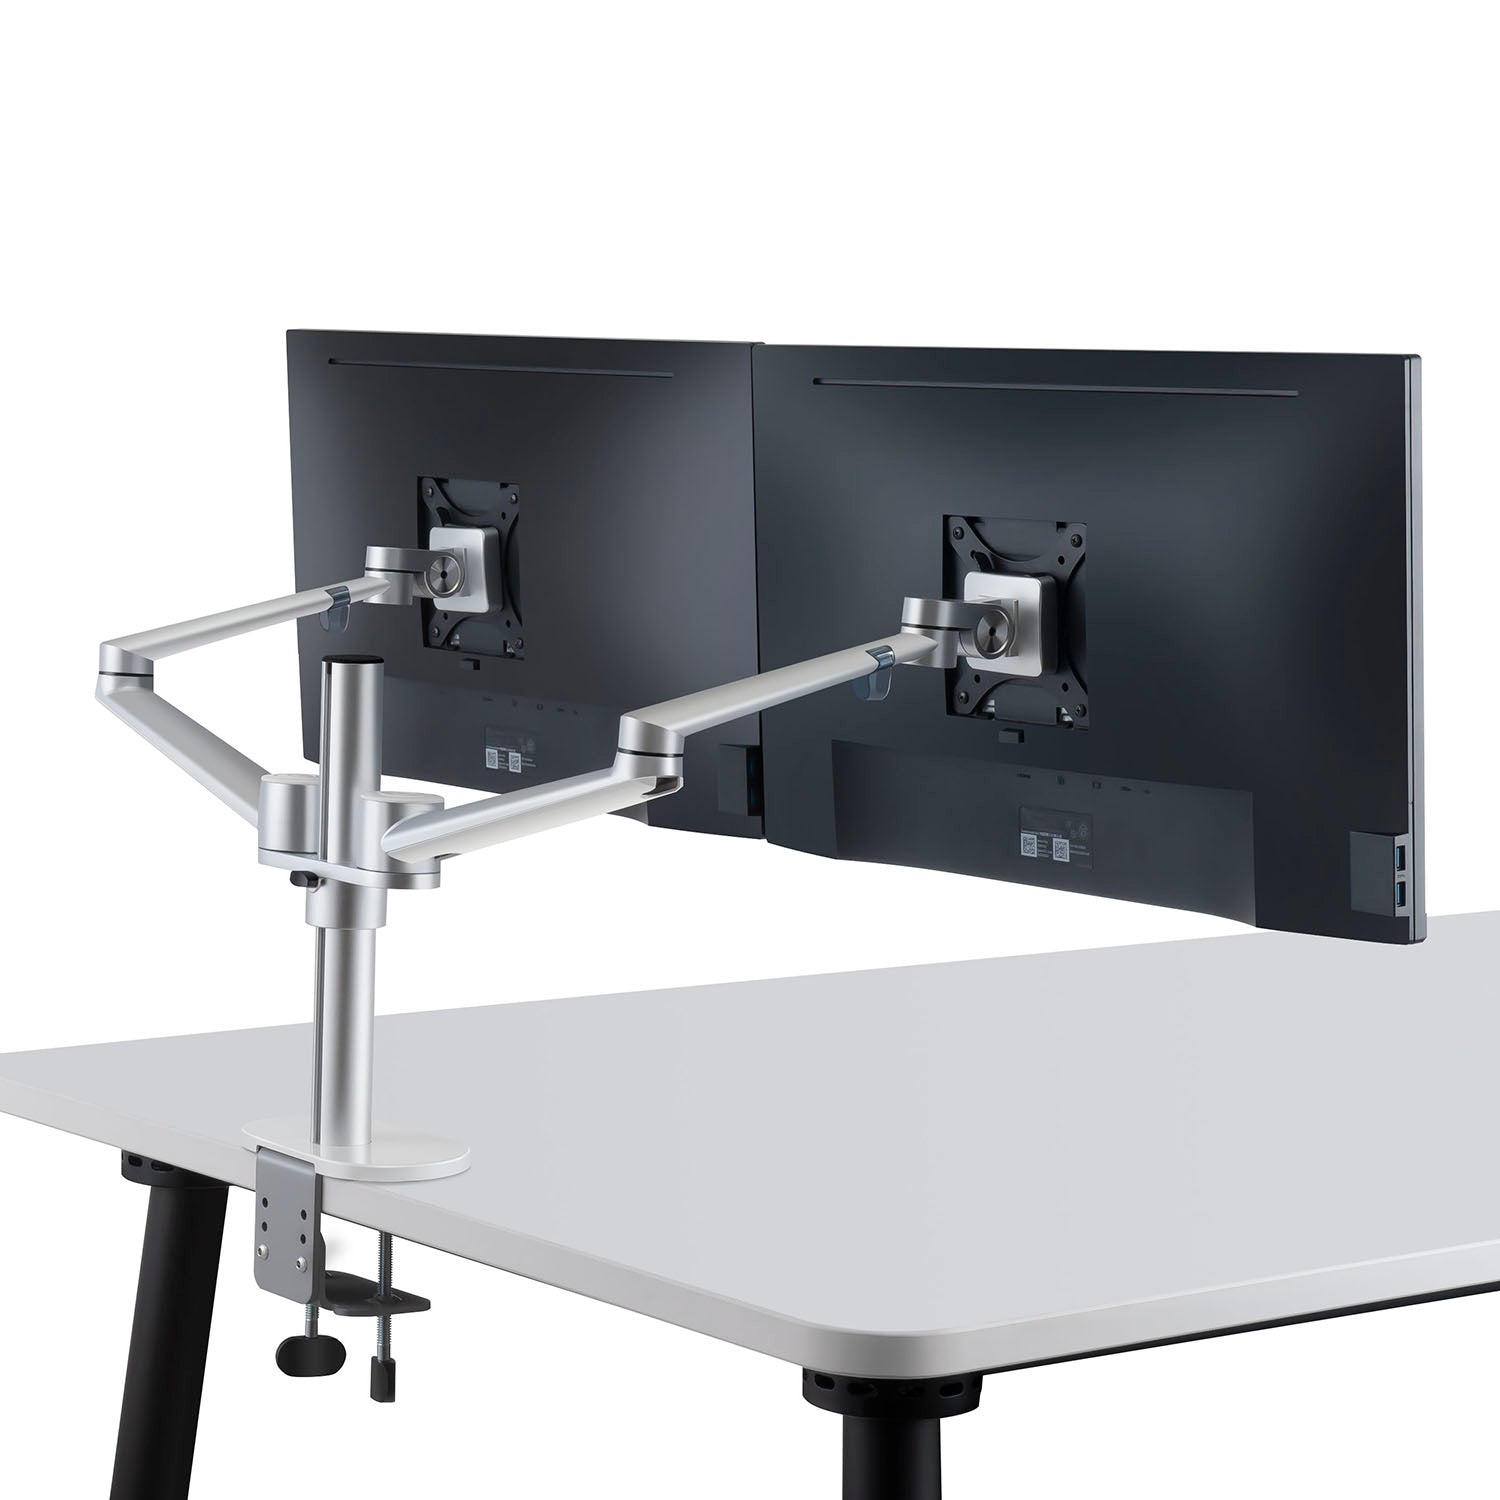 ThingyClub® Dual LCD Arm Desk VESA Bracket & Monitor Arm Stand for 10-27  Screens: Tilt up 90° /down 85°, Swivel left / right 180°, 360° Rotation